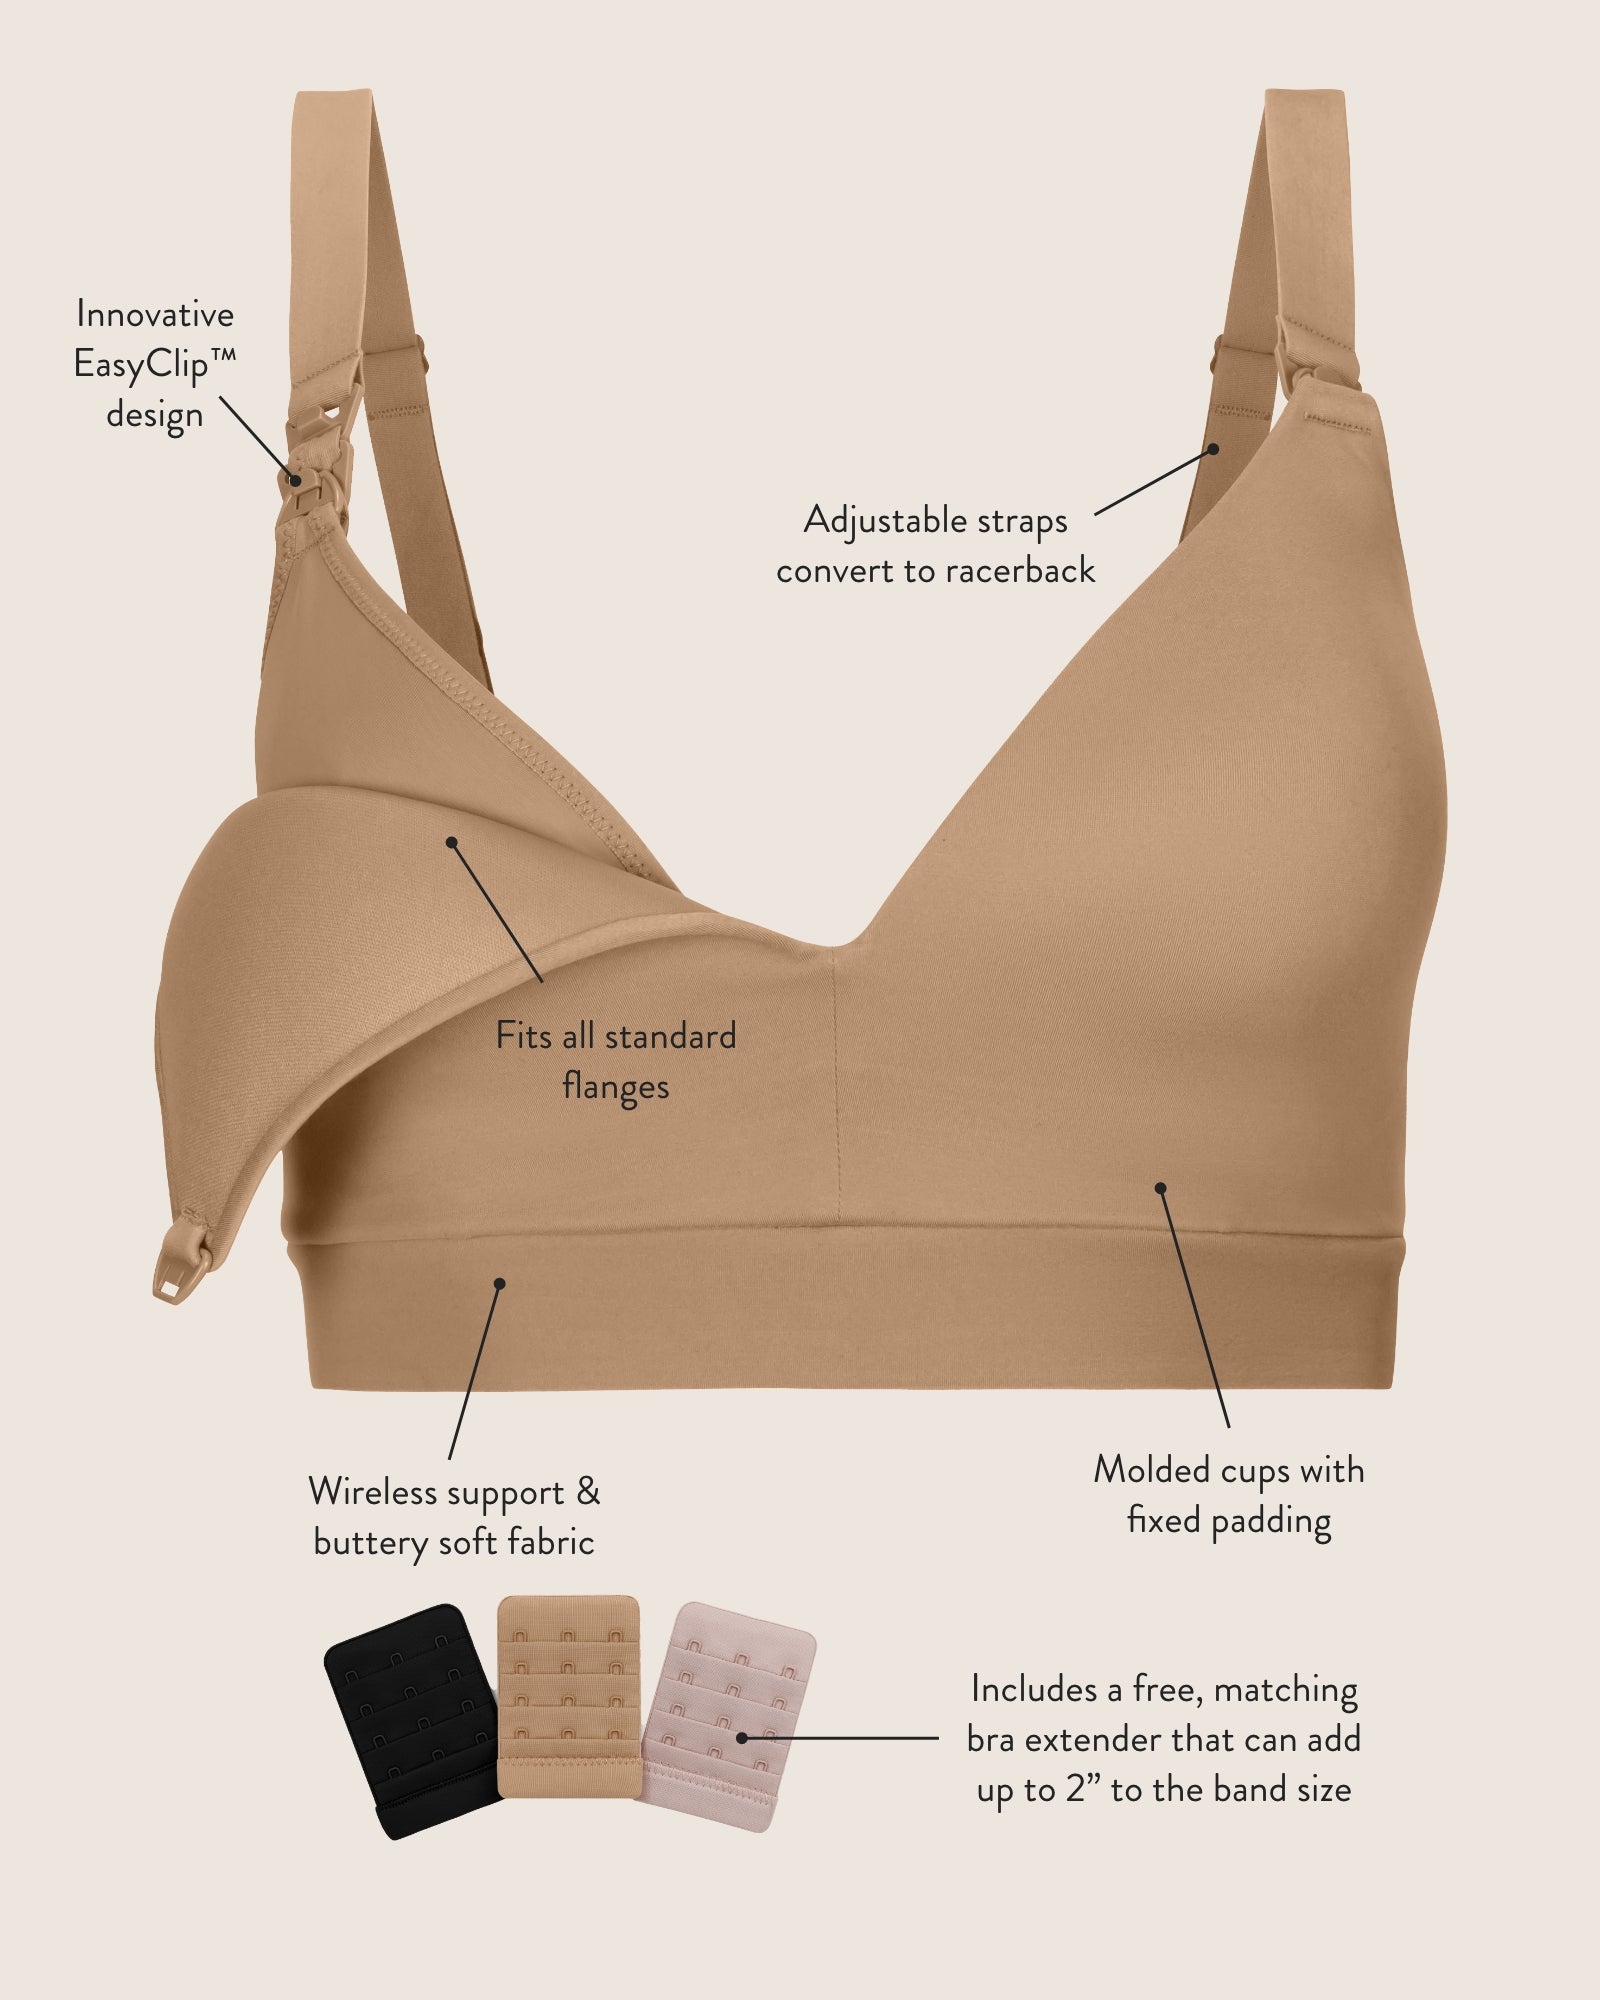 Flat image of the Minimalist Hands-Free Pumping & Nursing Bra showcasing its unique qualities: EasyClip Design, Adjustable straps that convert to racerback, wireless cups.  